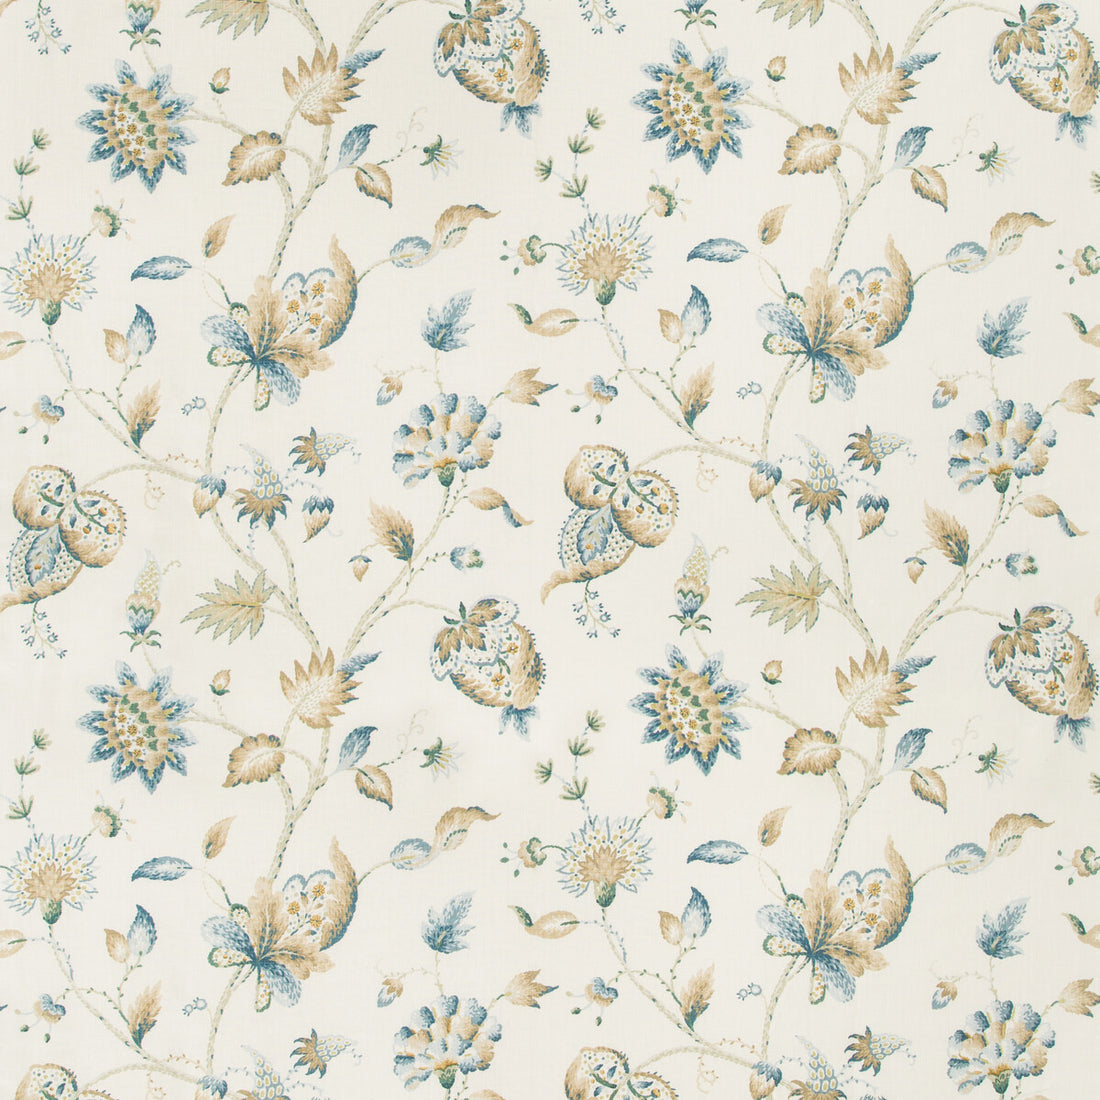 Hollin Print fabric in mineral color - pattern 2019105.165.0 - by Lee Jofa in the Manor House collection